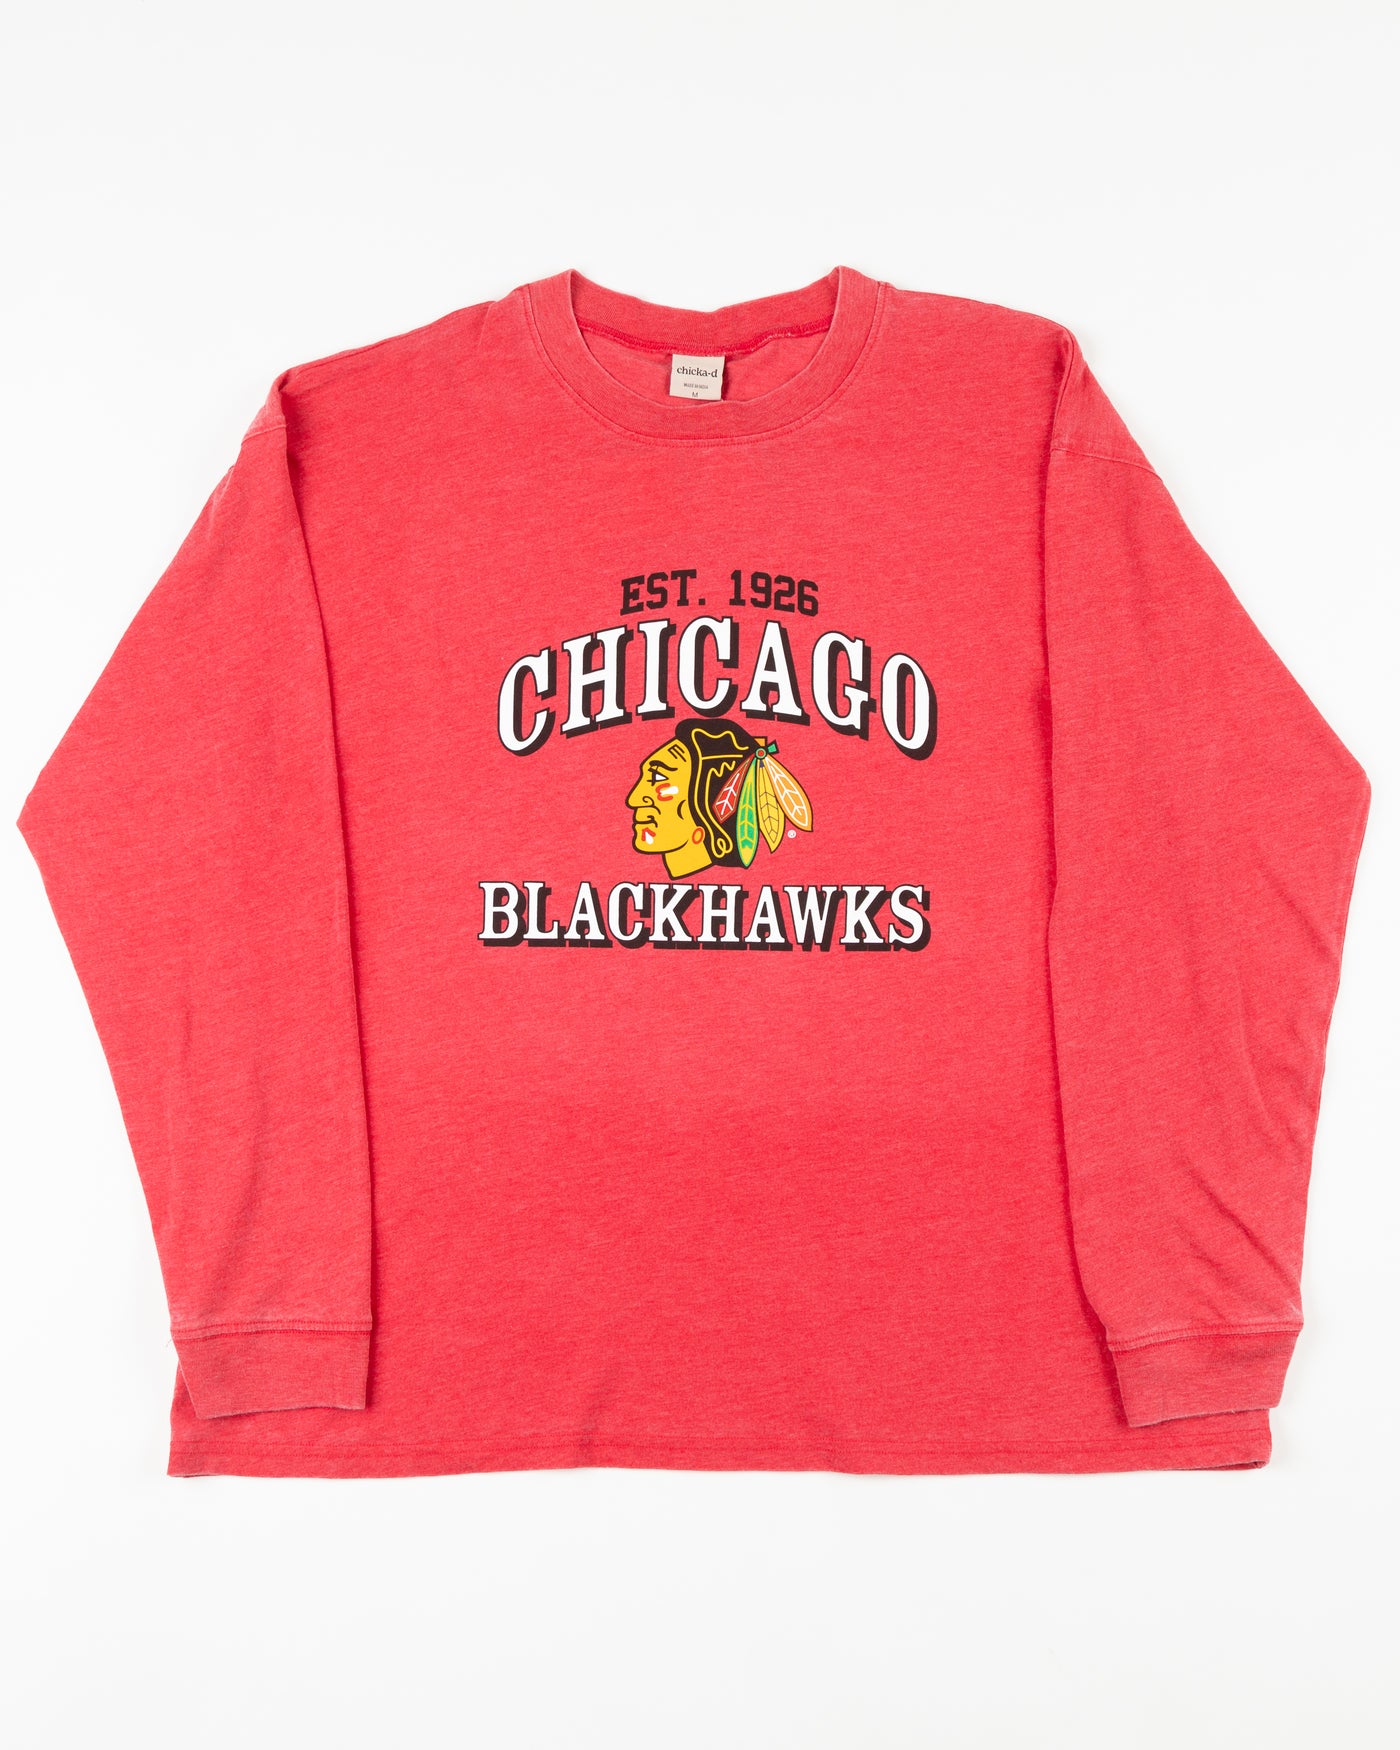 red ladies chicka-d long sleeve tee with Chicago Blackhawks graphic across front - front lay flat